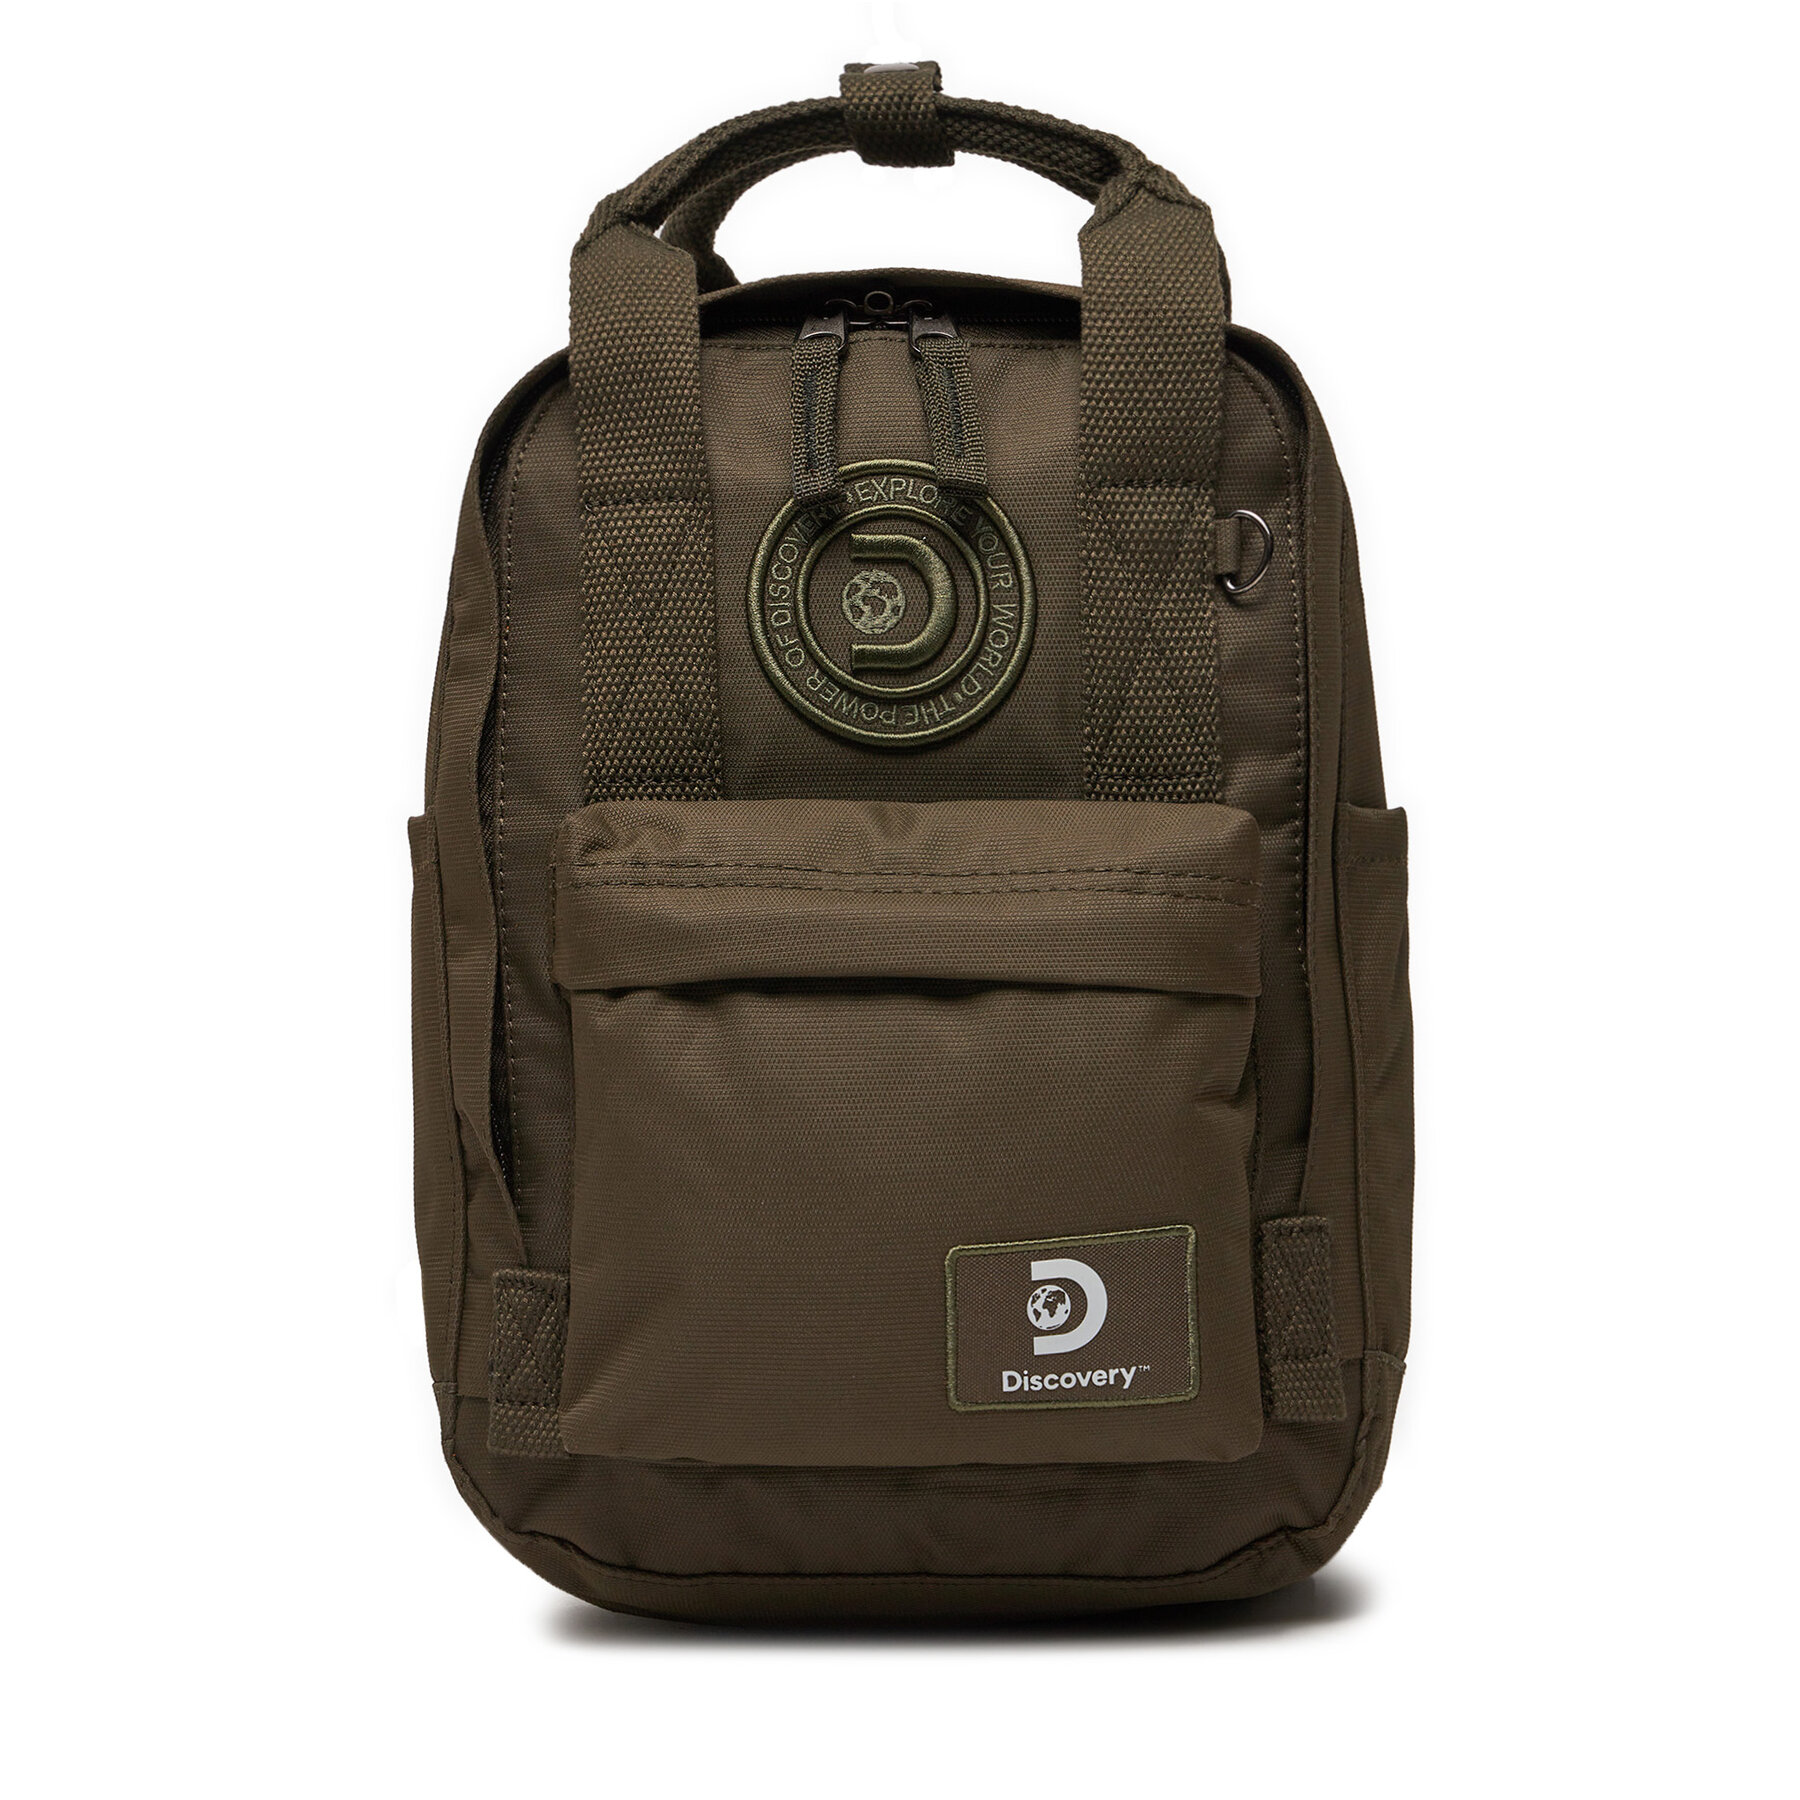 Rucksack Discovery Small D00811.11 Khakifarben von Discovery